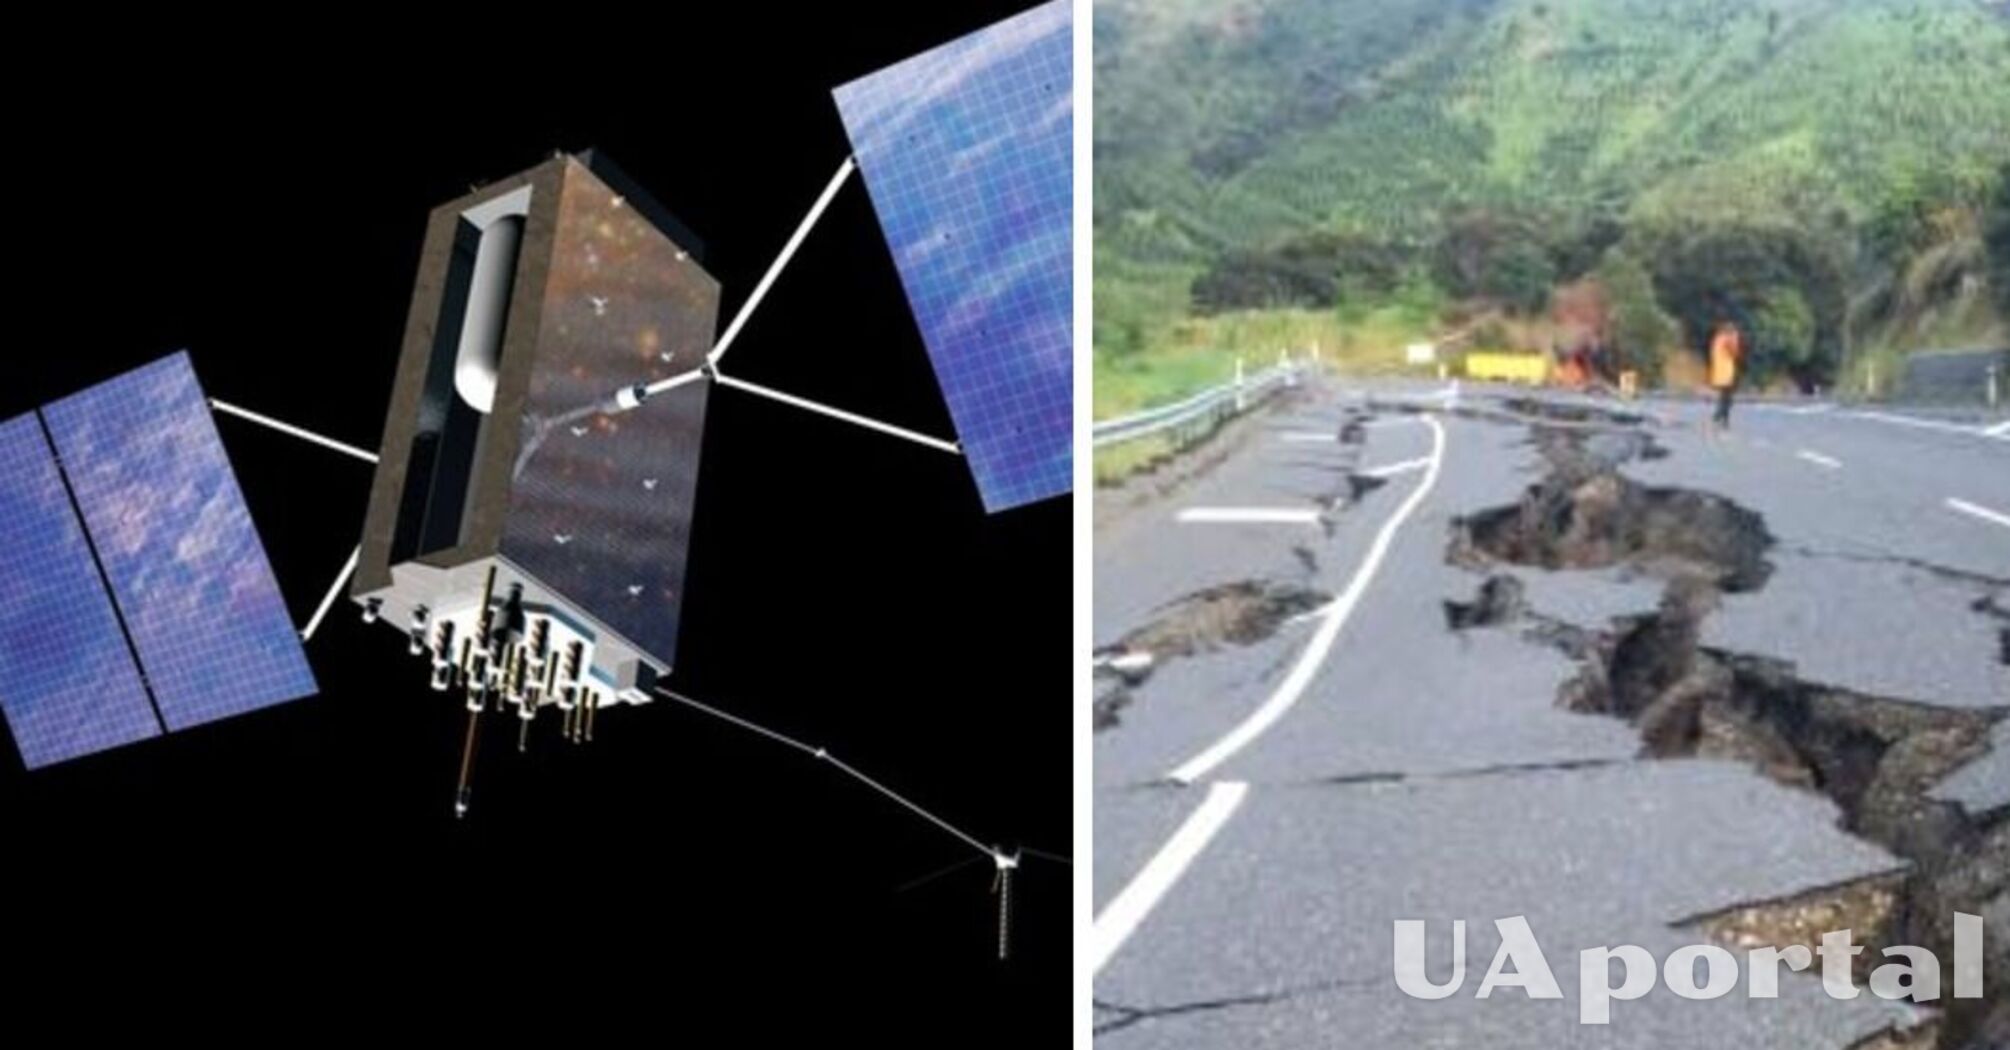 Scientists from France have figured out how to warn of earthquakes using GPS satellites